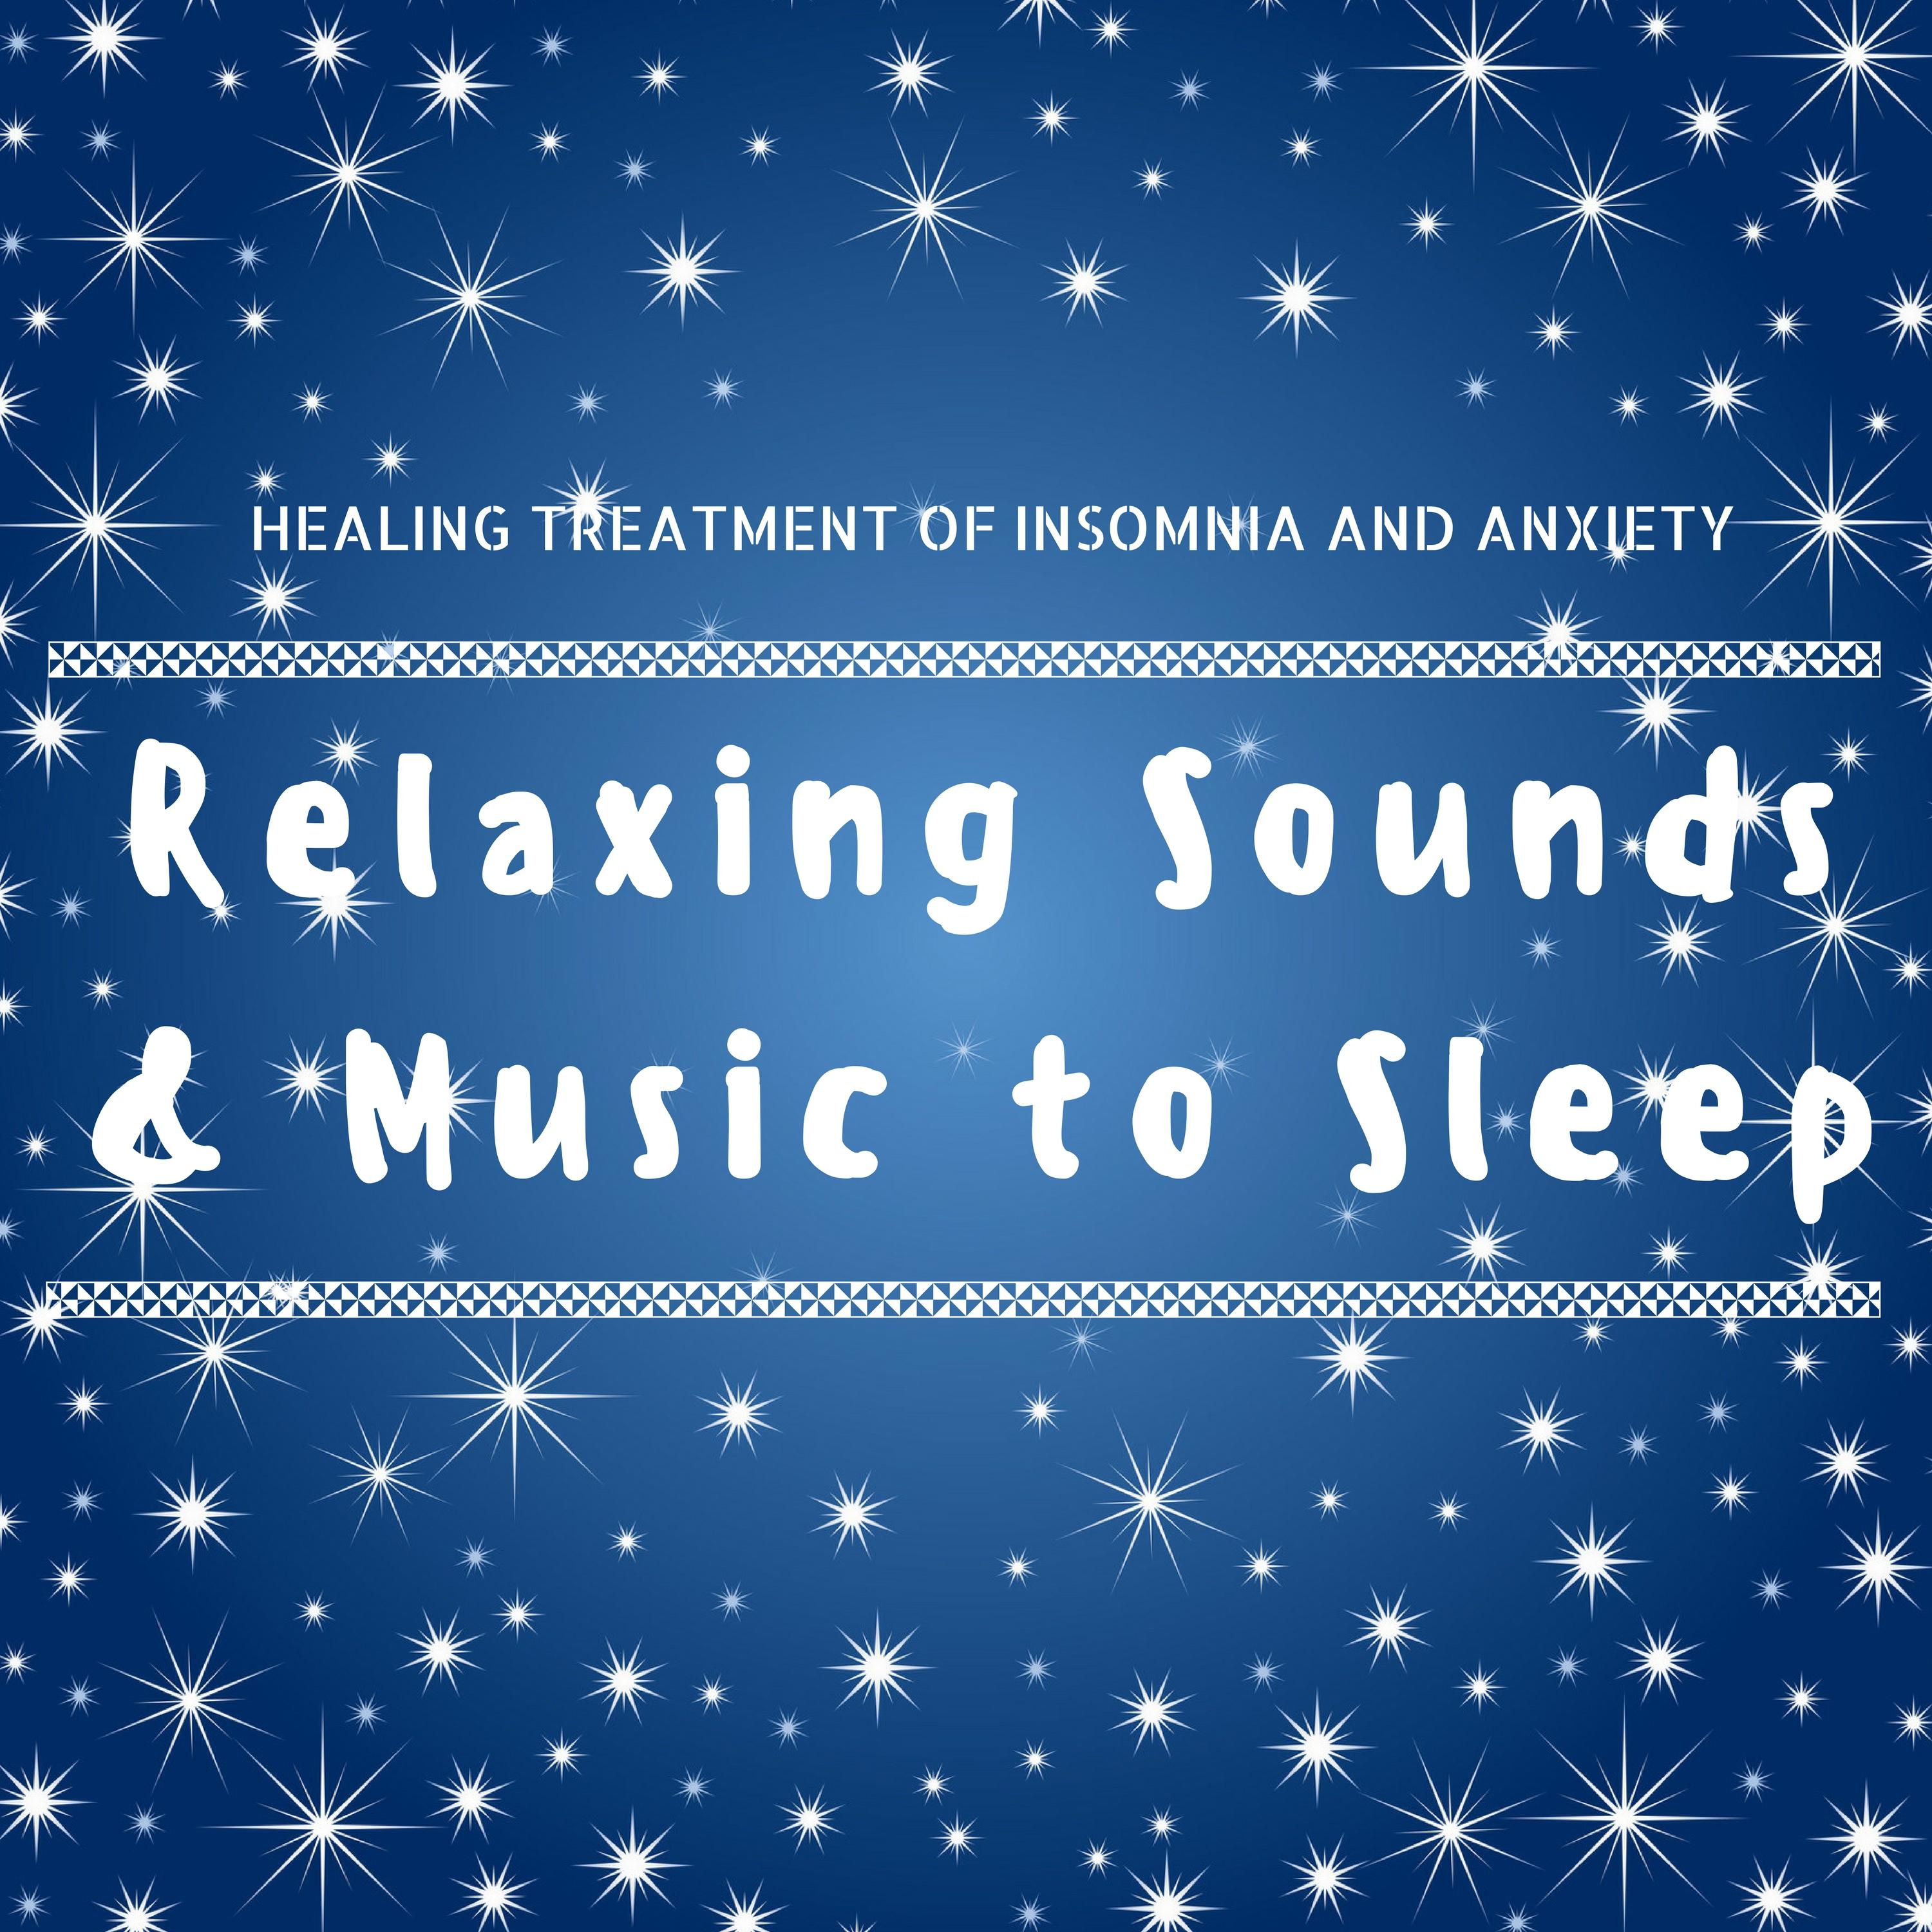 Relaxing Sounds & Music to Sleep to, Healing Treatment of Insomnia and Anxiety